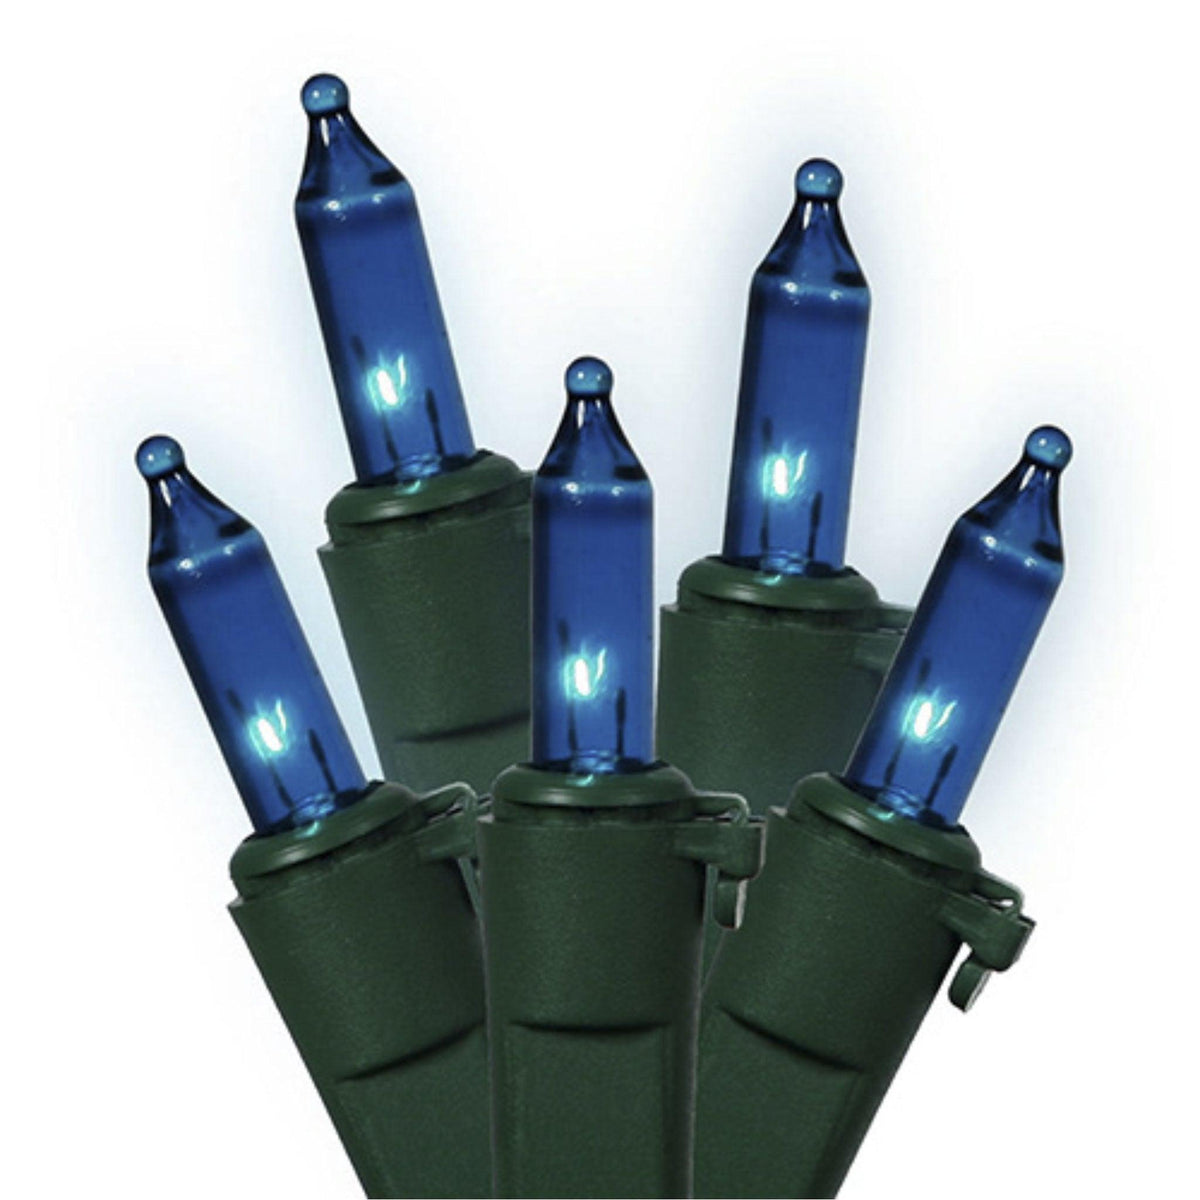 Buy Brand New Steady Blue Bulb Mini Incandescent Green Wire Christmas String Lights at Lee Display